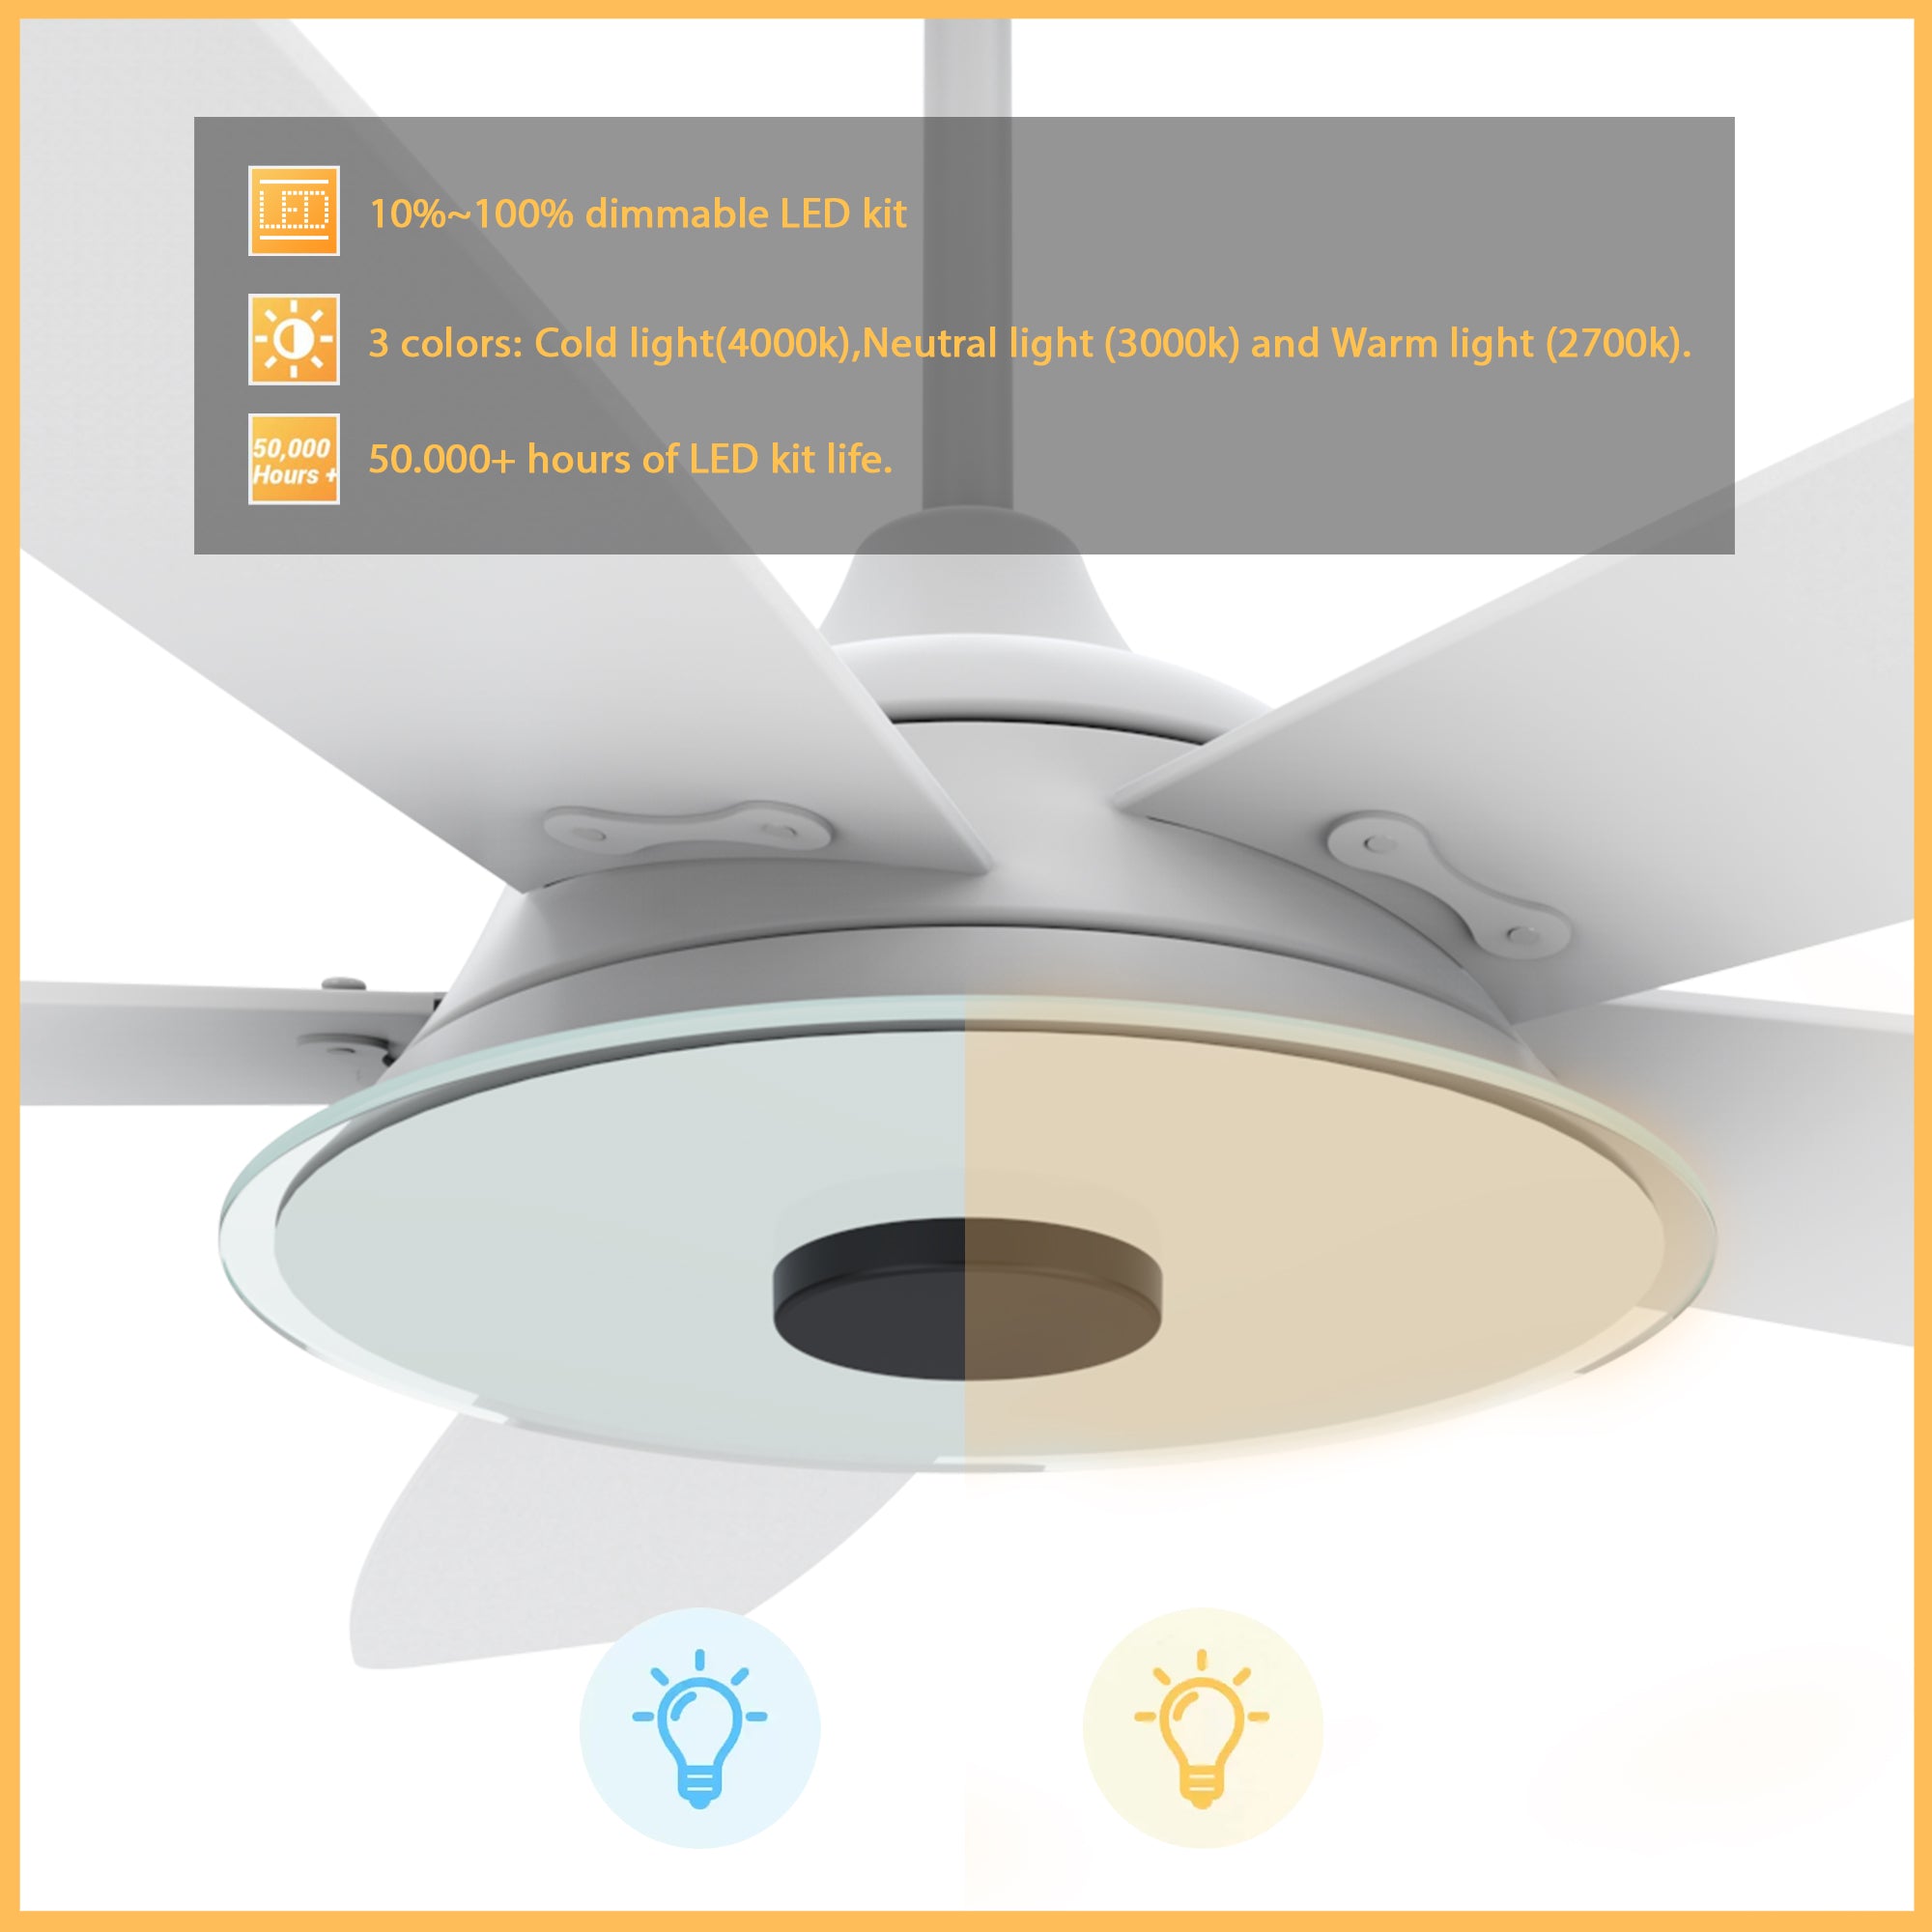 The Smafan Striker 56&#39;&#39; Smart Fan will blend beautifully in any décor trend. Five different airfoil color options, dimmable Led light perfectly matches your space. Compatible with Amazon Alexa and Google Assistant and Siri, Striker helps you control your fan with the phone app, remote, and voice command.